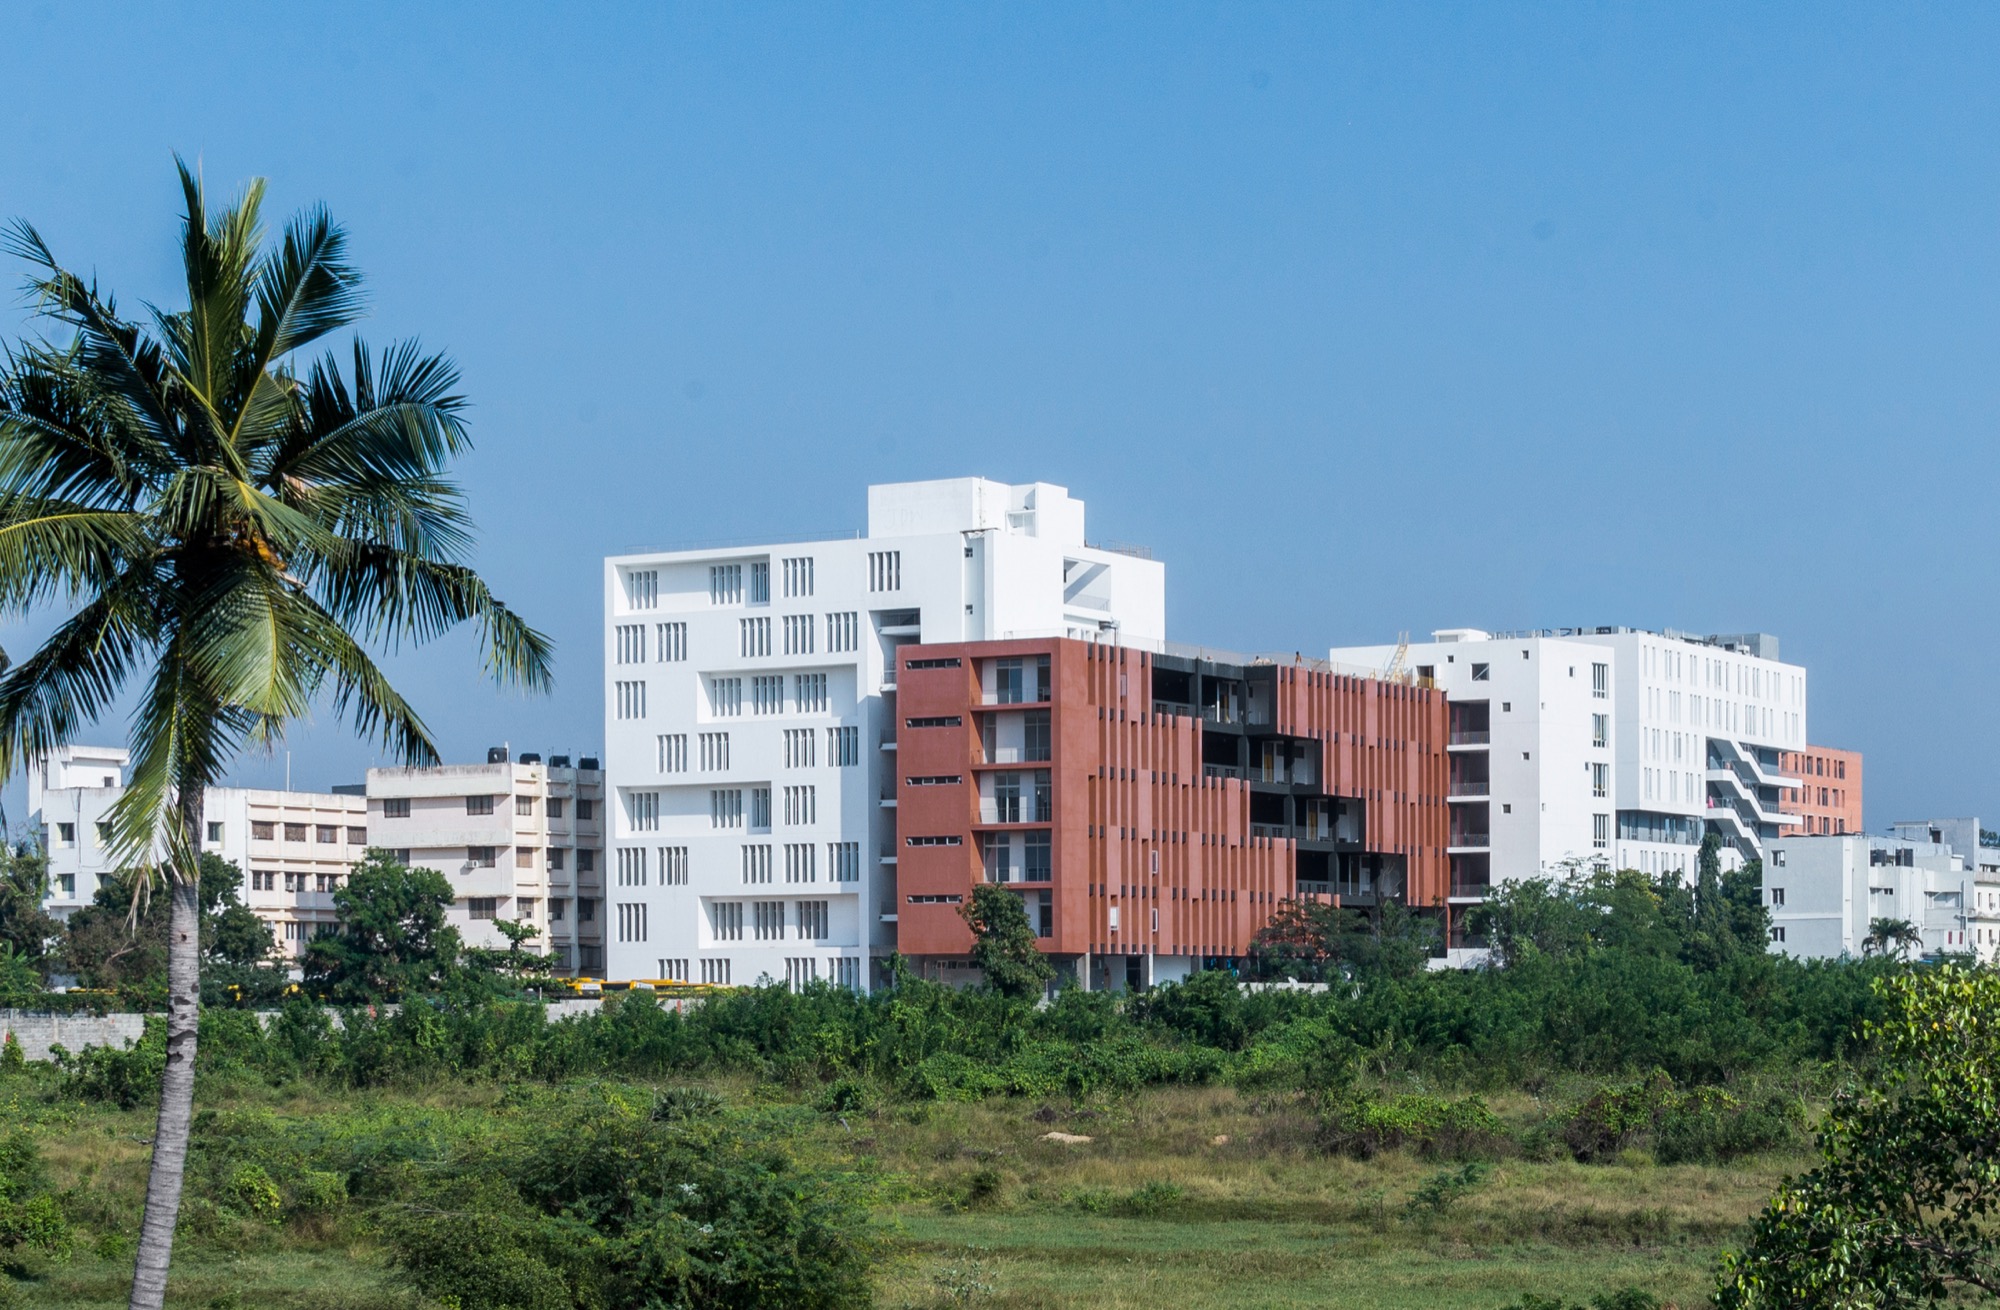 Crescent School of Architecture, Chennai, by architectureRED